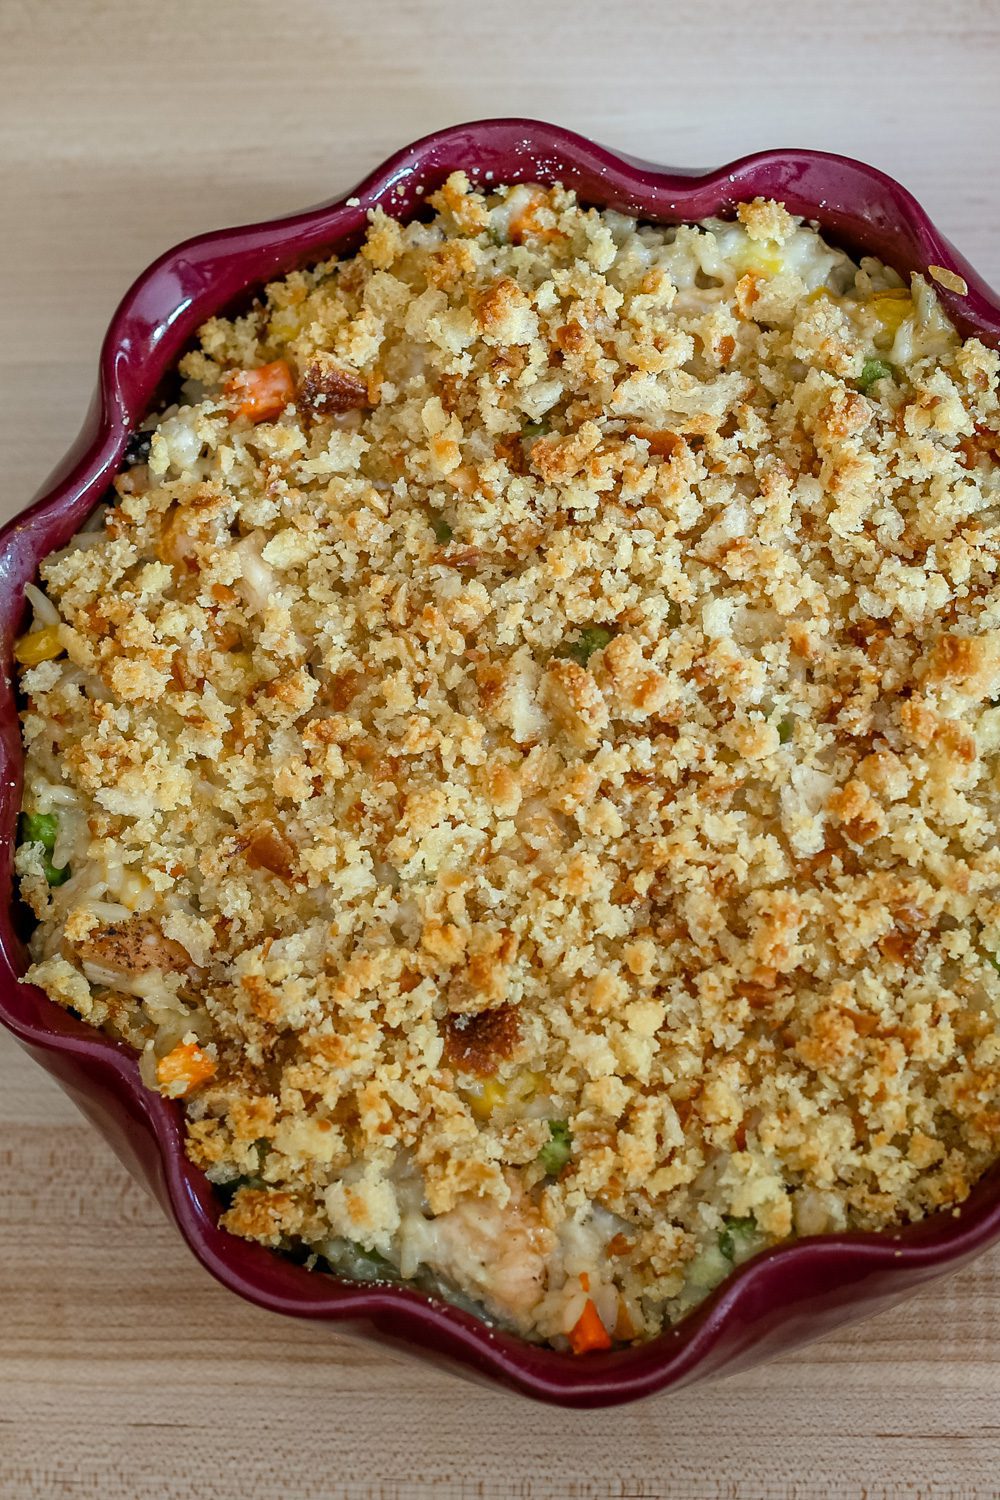 turkey and rice casserole in a baking dish